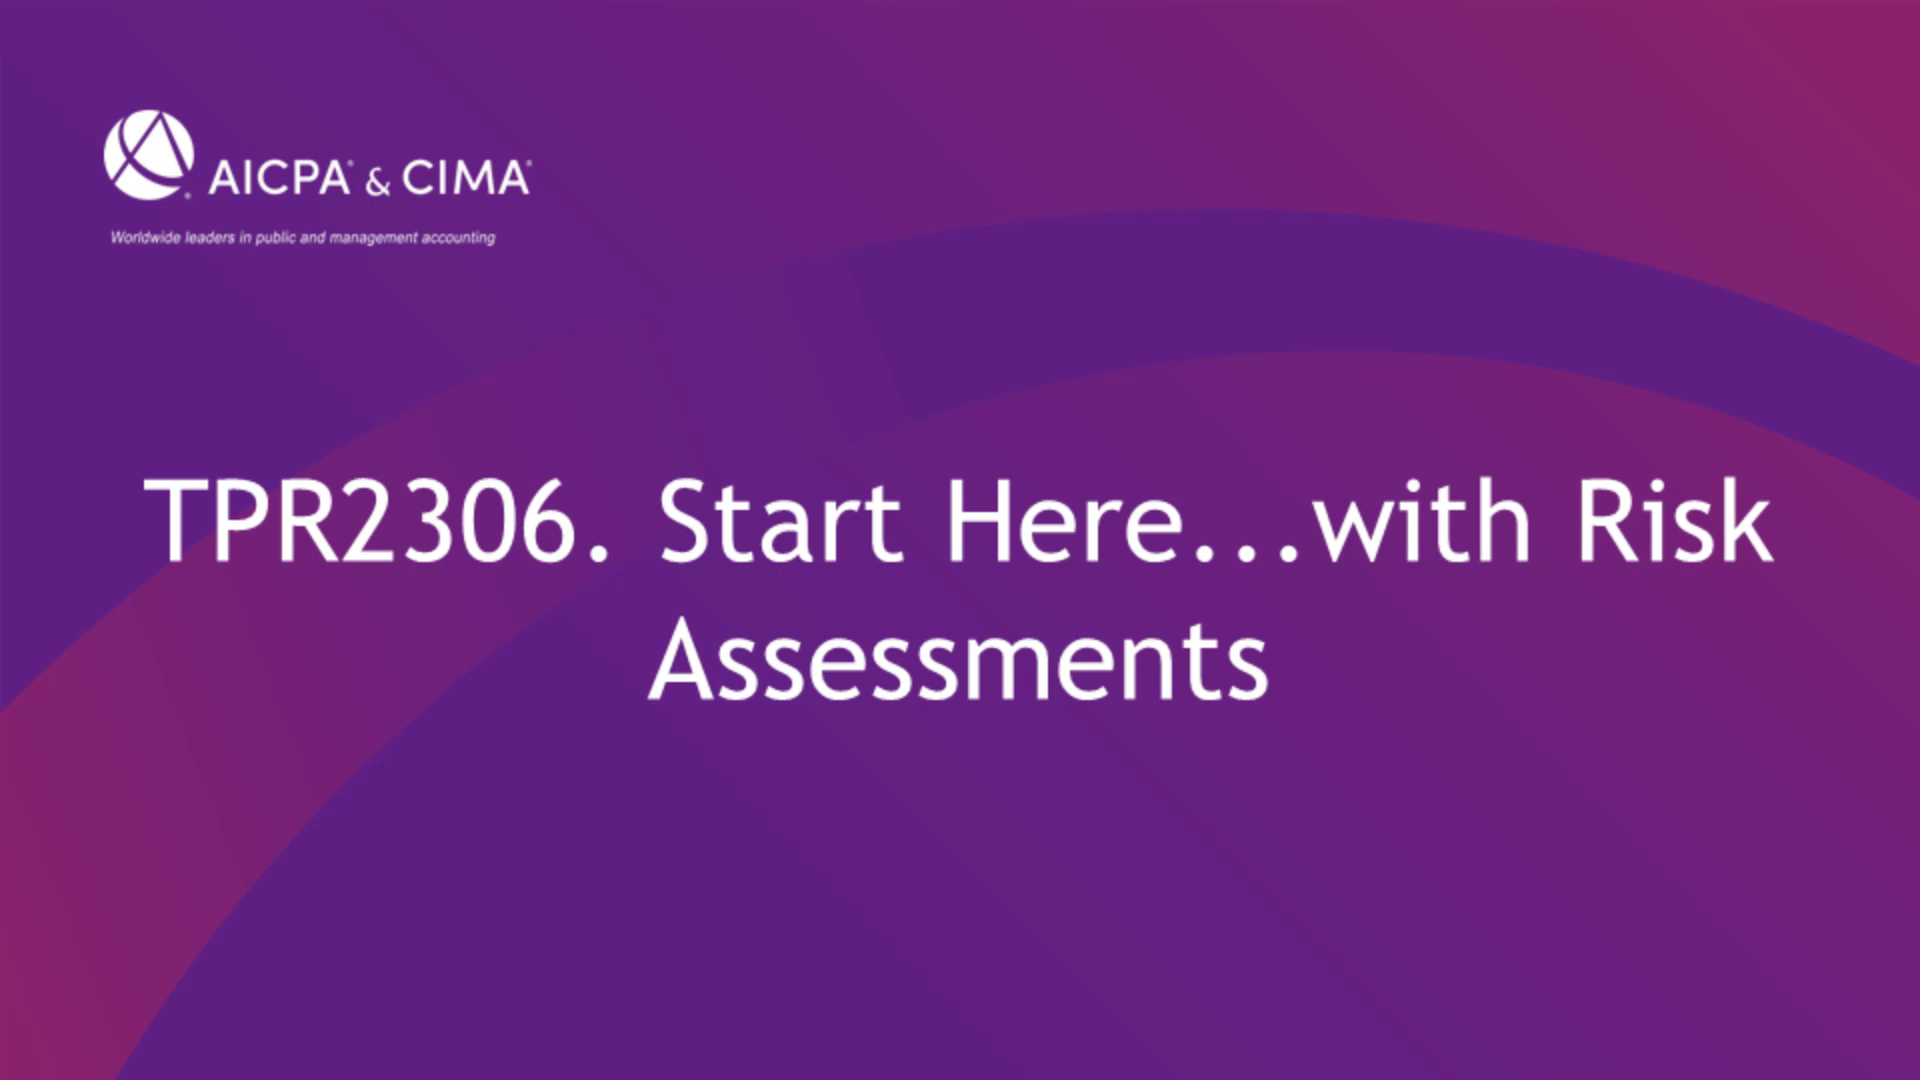 Start Here...with Risk Assessments